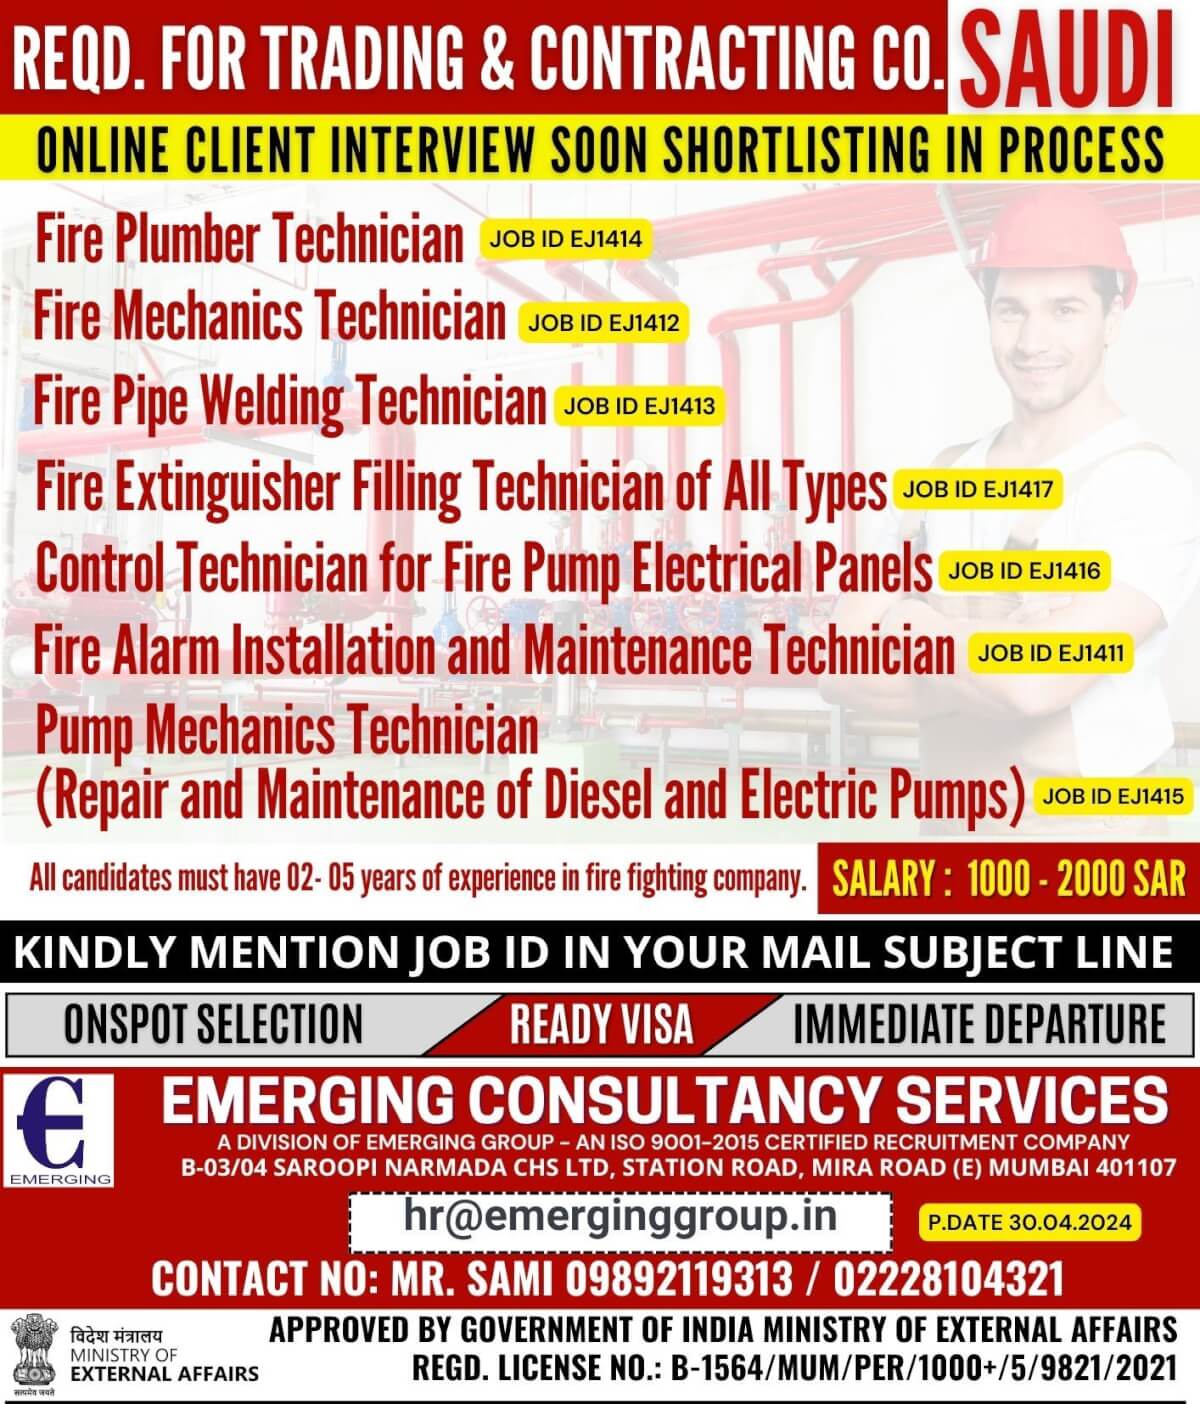 REQUIRED FOR TRADING AND CONTRACTING COMPANY IN SAUDI ARABIA